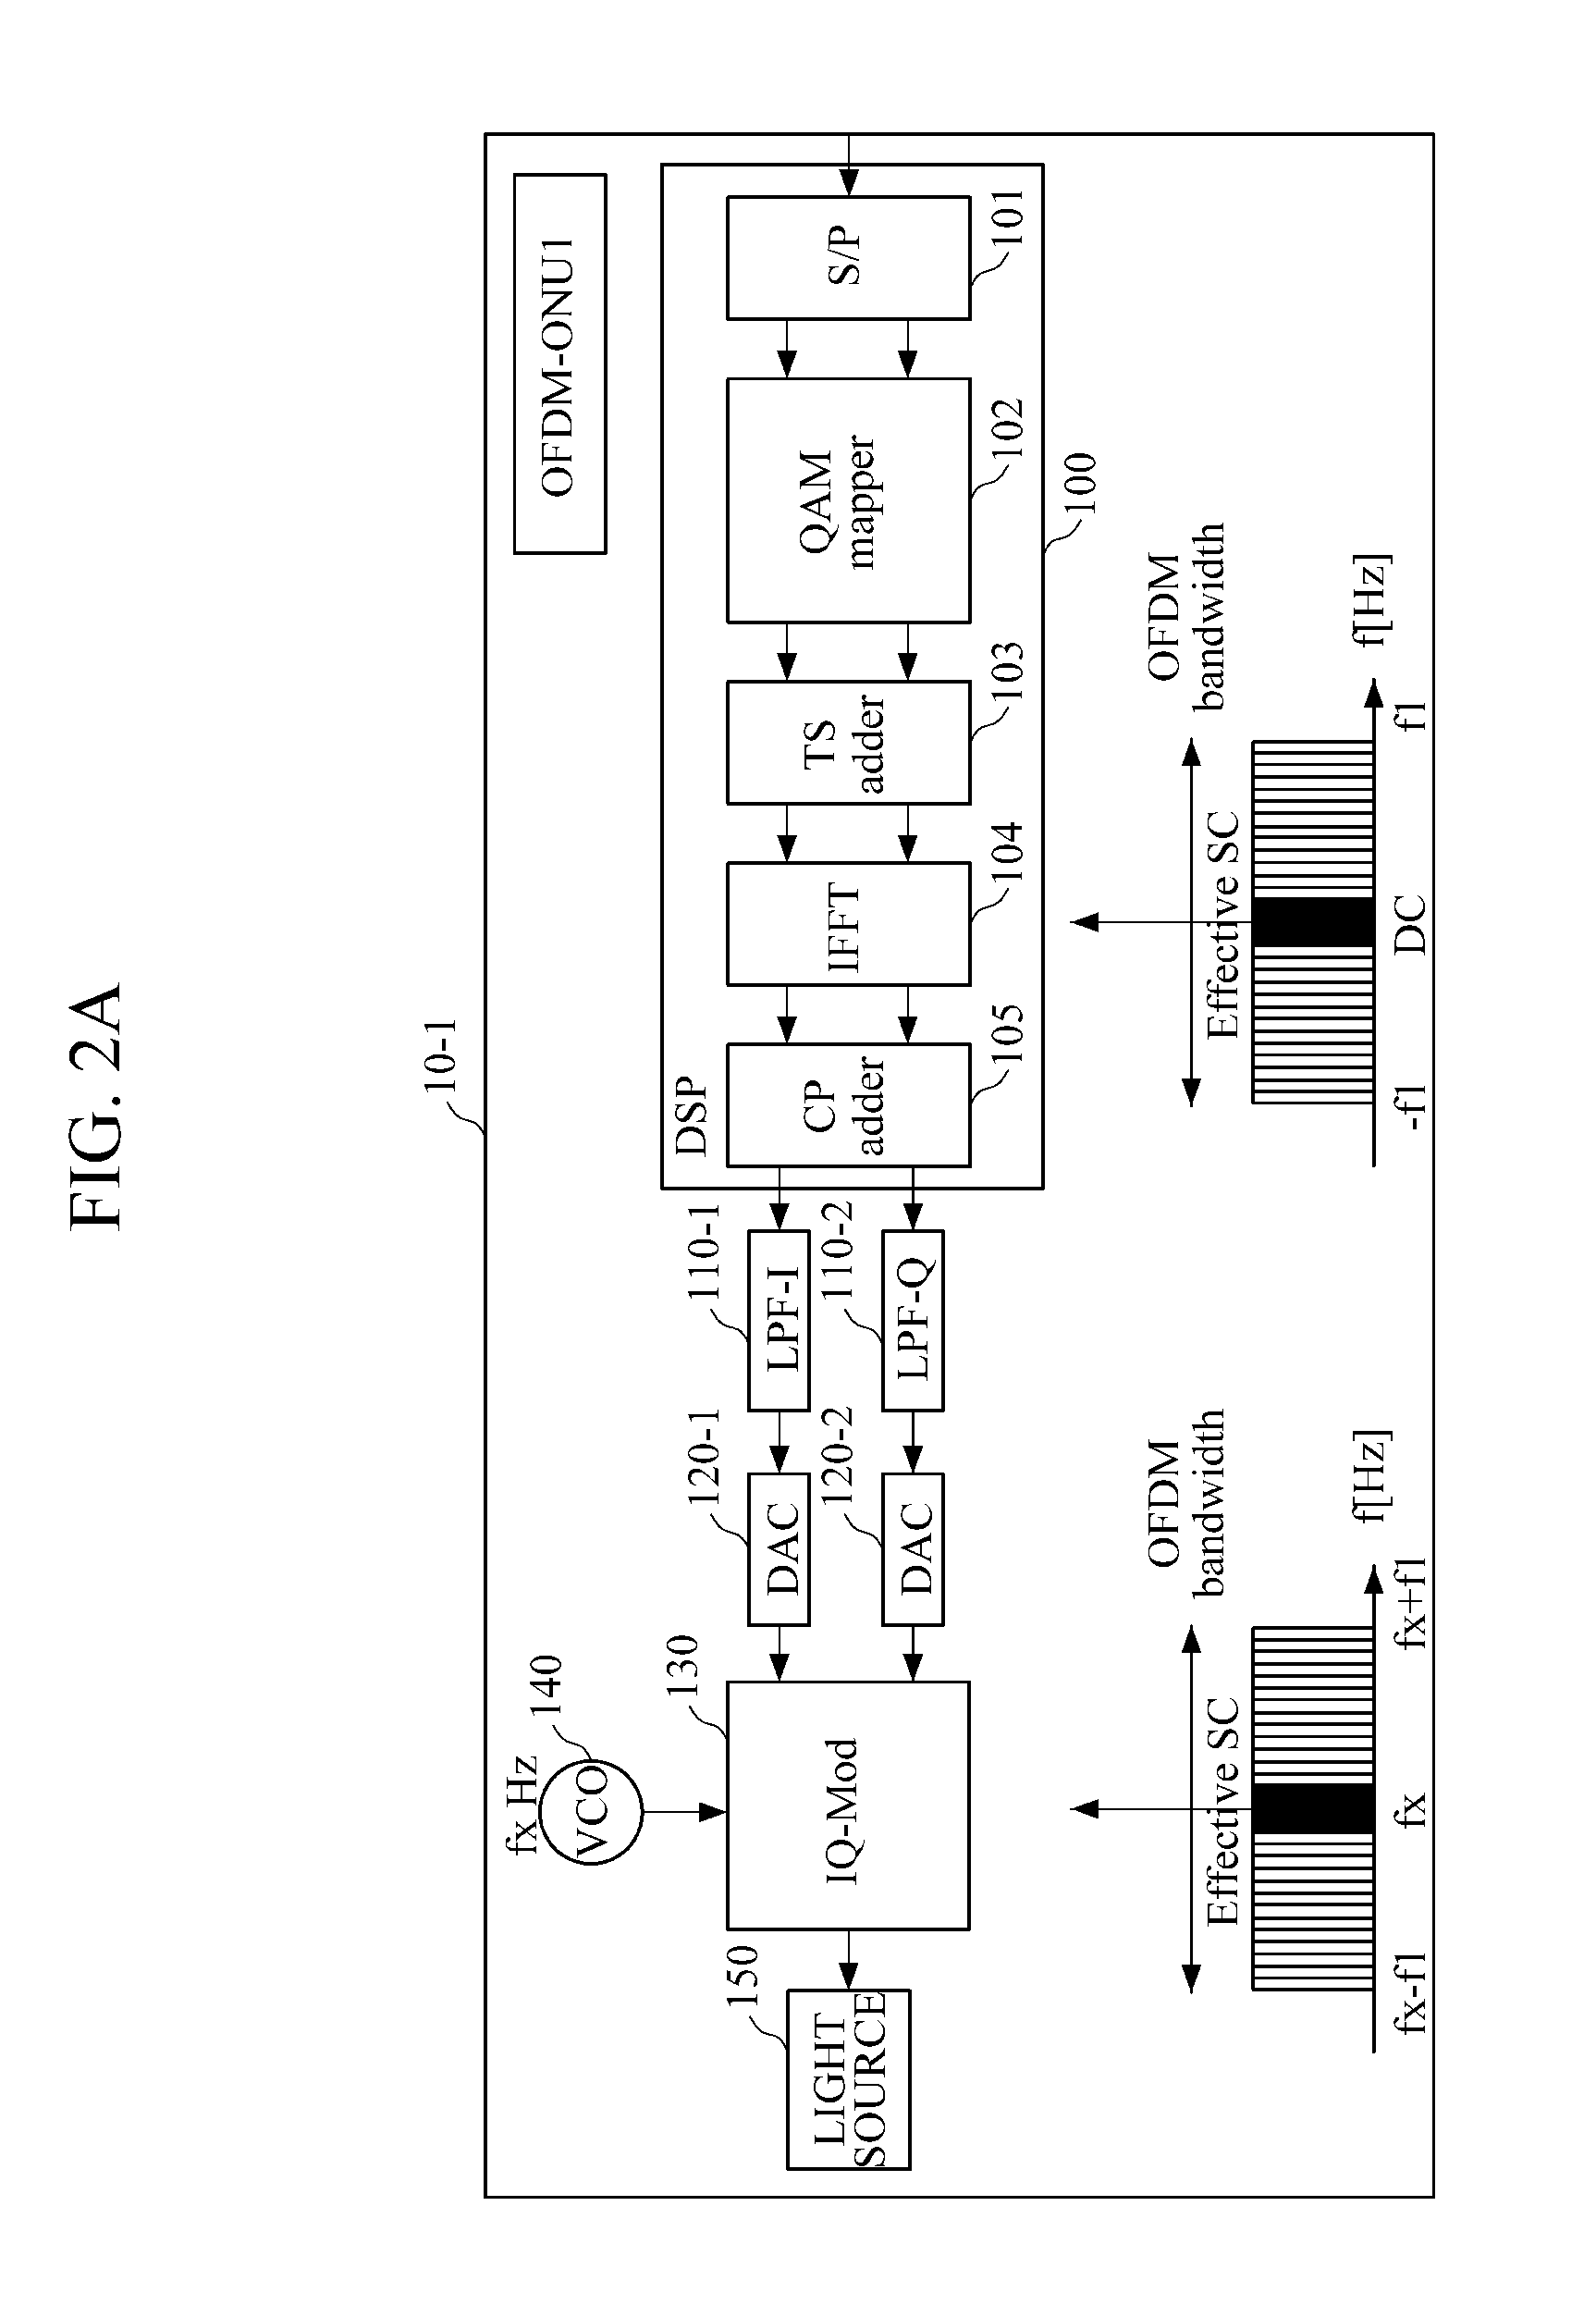 Orthogonal frequency division multiple access-passive optical network comprising optical network unit and optical line terminal